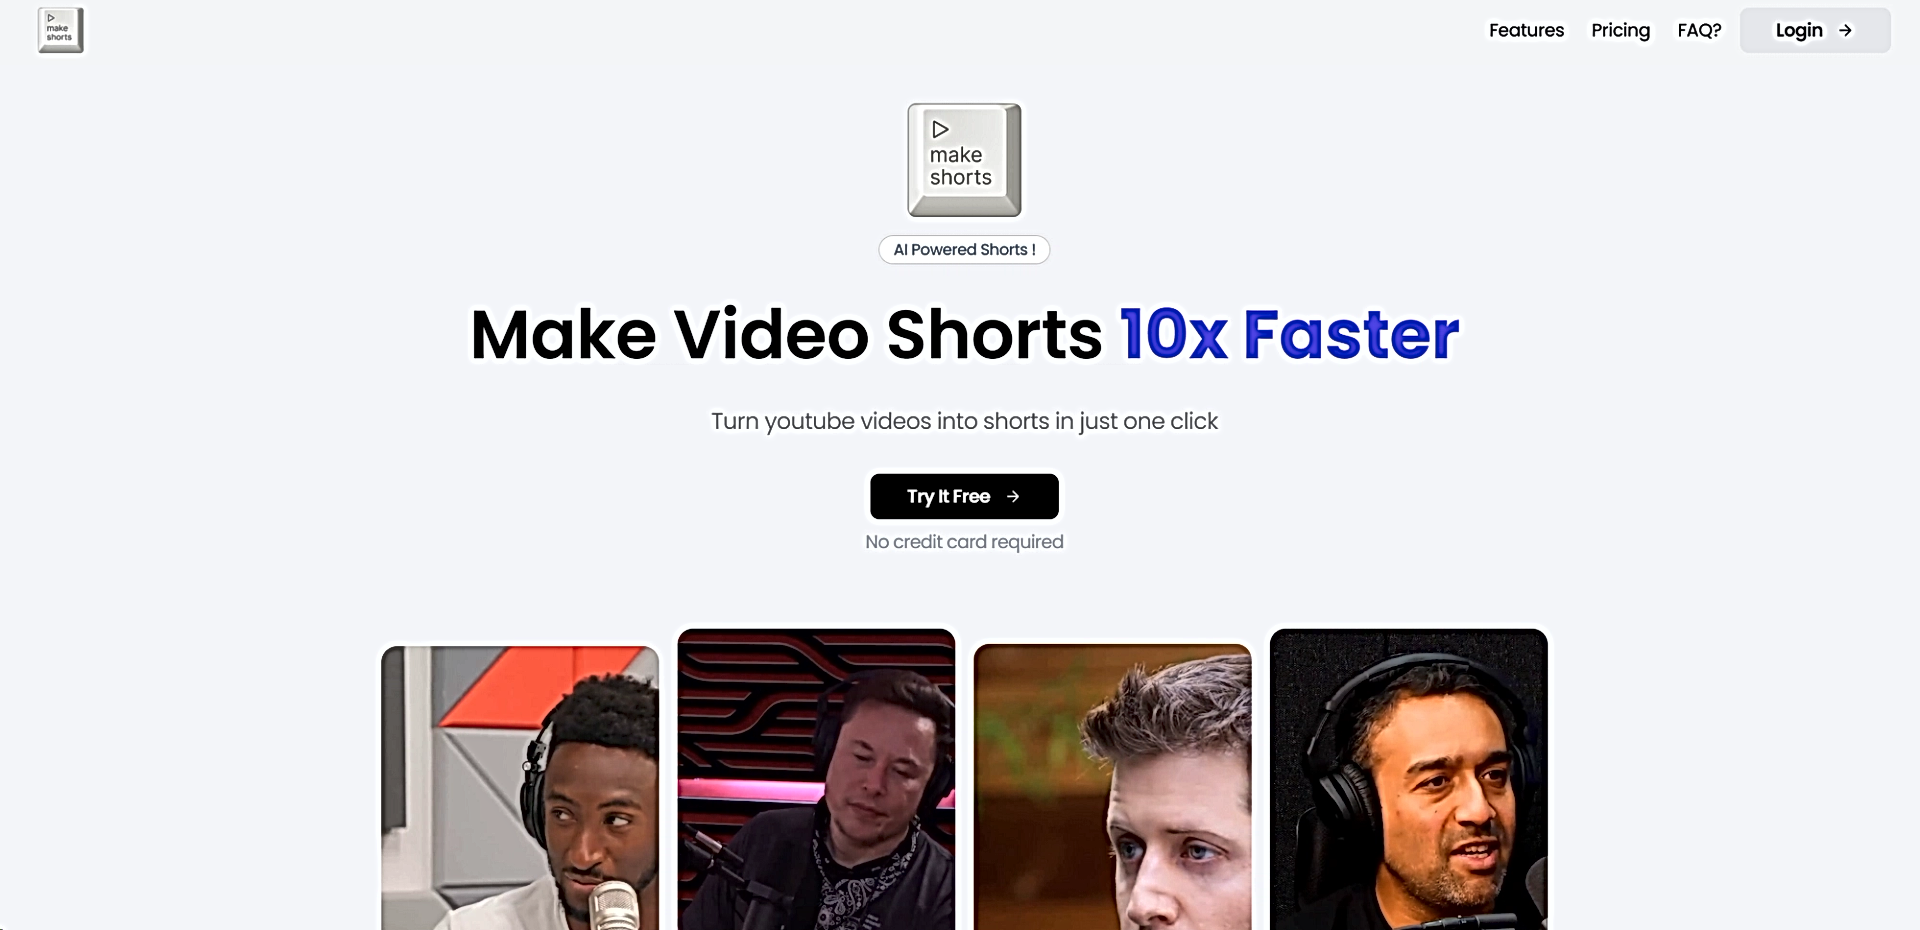 MakeShorts featured